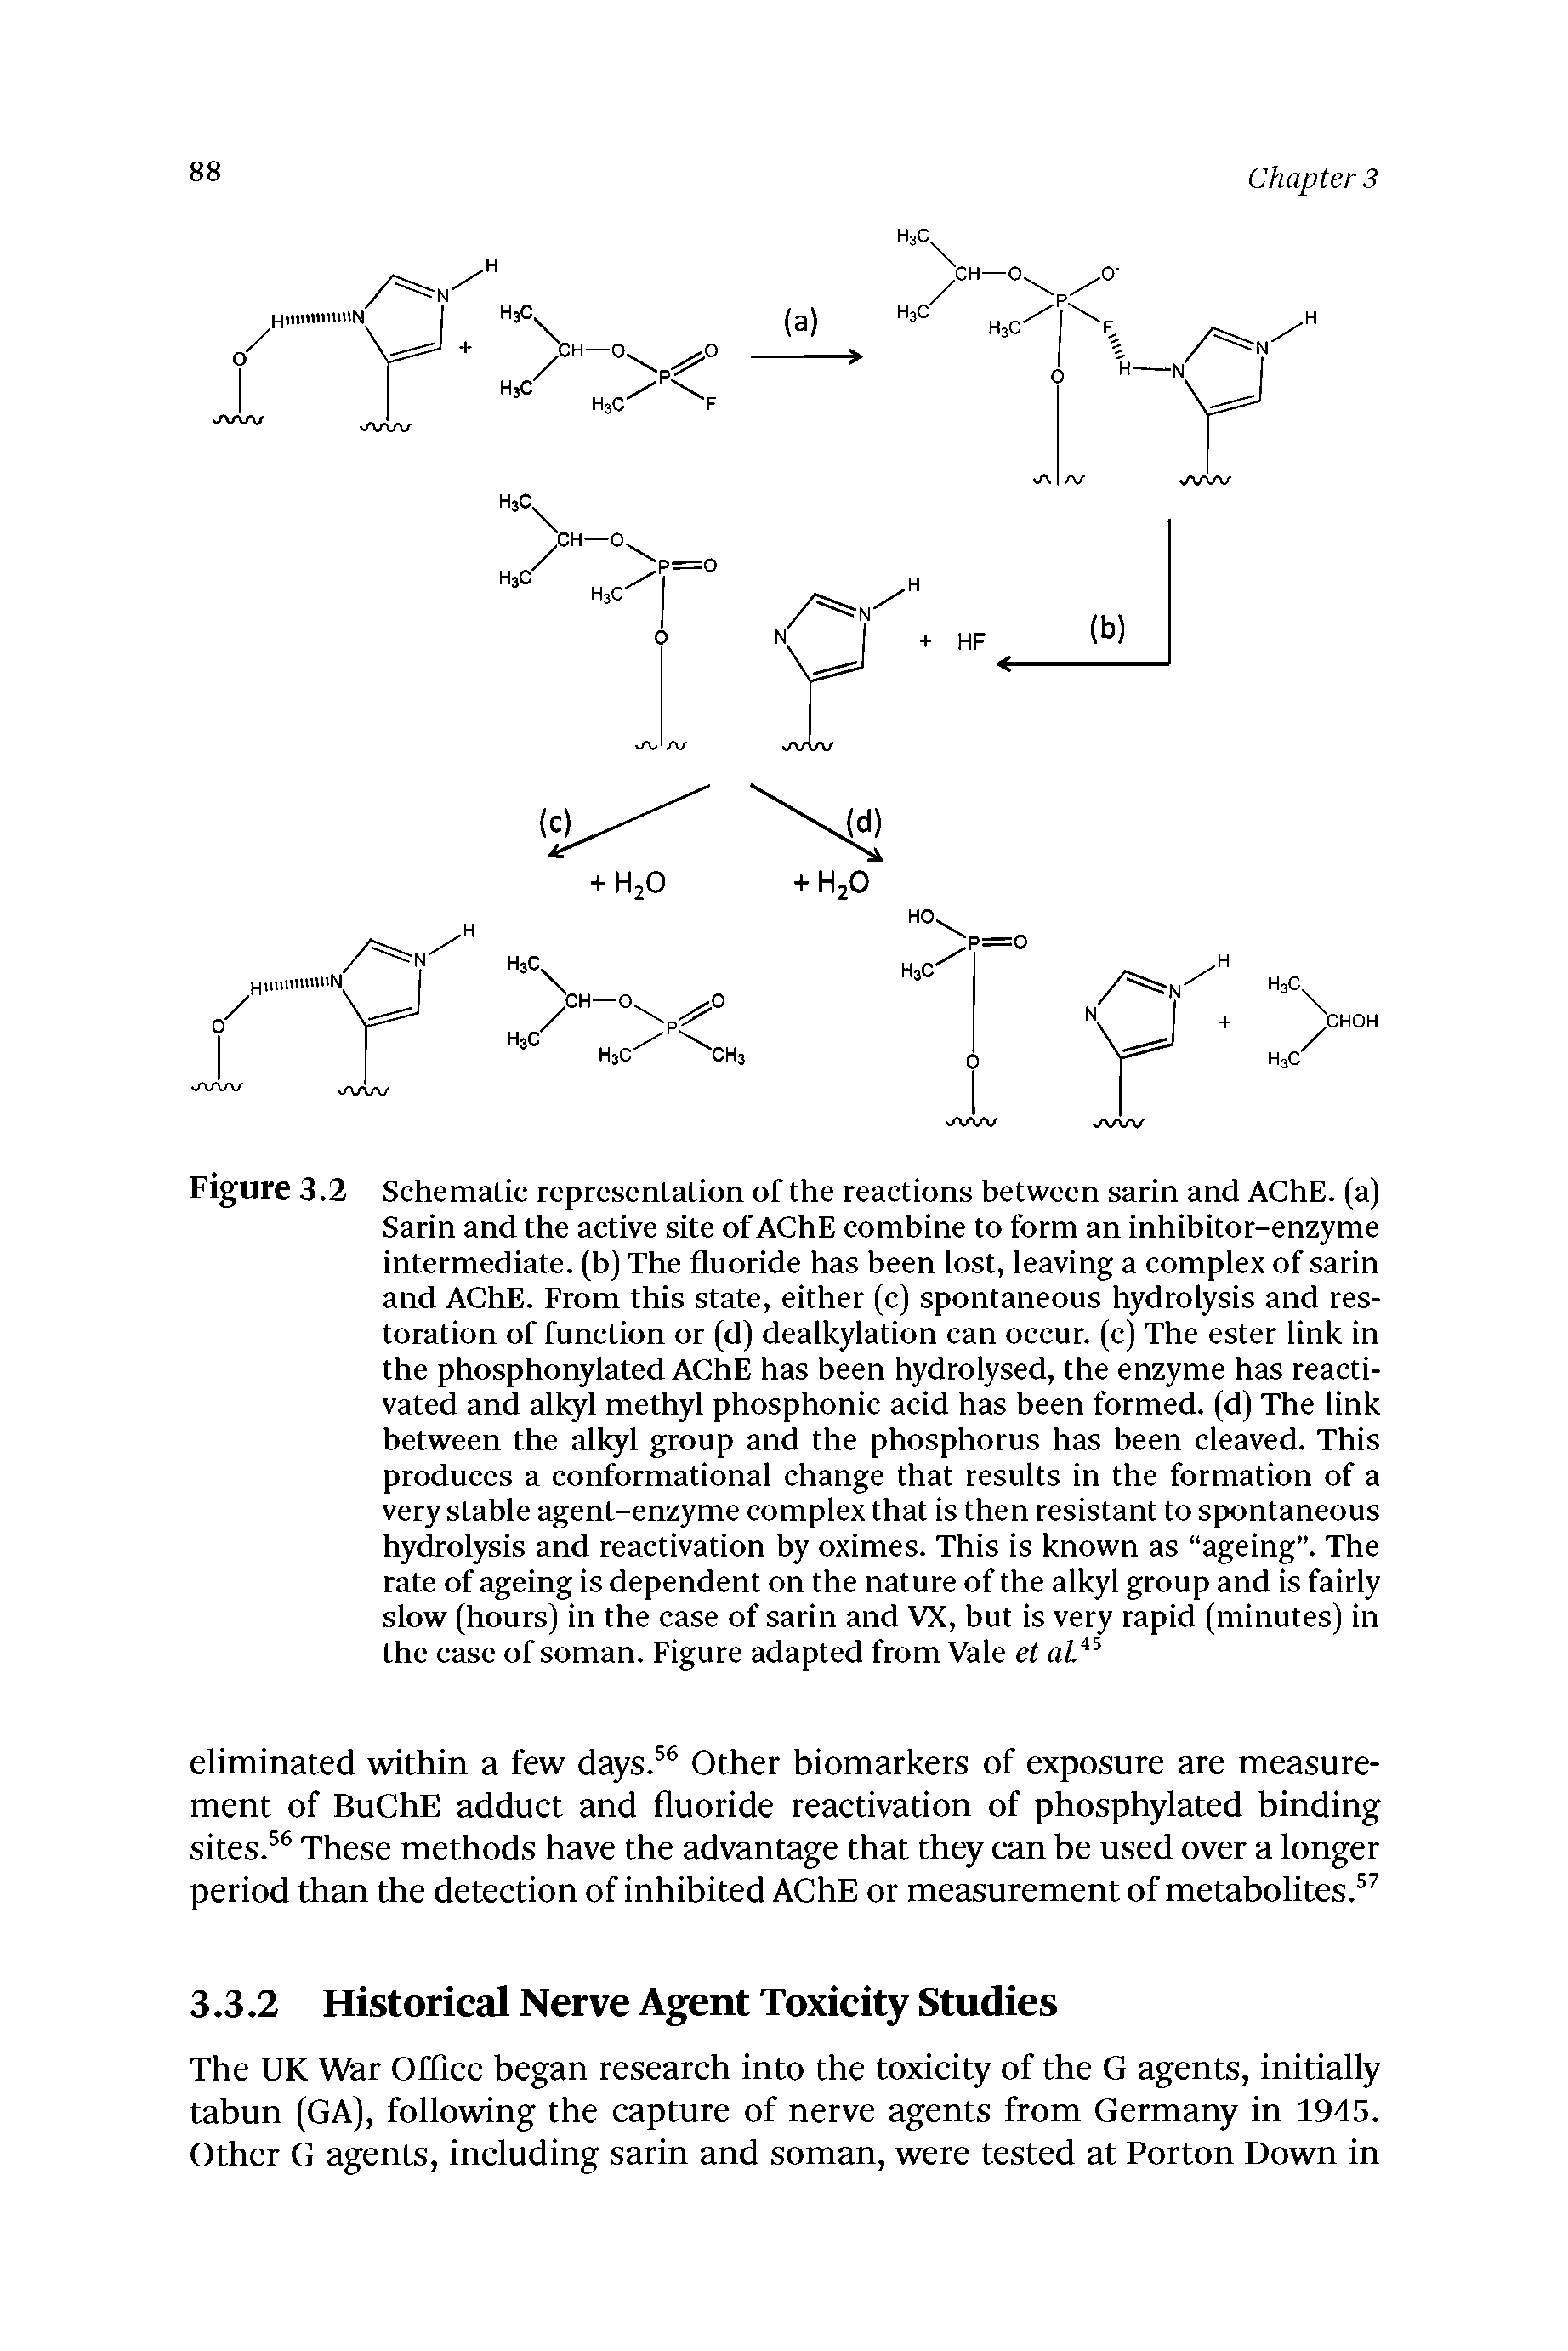 Figure 3.2 Schematic representation of the reactions between sarin and AChE. (a) Sarin and the active site of AChE combine to form an inhibitor-enzyme intermediate, (b) The fluoride has been lost, leaving a complex of sarin and AChE. From this state, either (c) spontaneous hydrolysis and restoration of function or (d) dealkylation can occur, (c) The ester link in the phosphonylated AChE has been hydrolysed, the enzyme has reactivated and alkyl methyl phosphonic acid has been formed, (d) The link between the alkyl group and the phosphorus has been cleaved. This produces a conformational change that results in the formation of a very stable agent-enzyme complex that is then resistant to spontaneous hydrolysis and reactivation by oximes. This is known as ageing . The rate of ageing is dependent on the nature of the alkyl group and is fairly slow (hours) in the case of sarin and VX, but is very rapid (minutes) in the case of soman. Figure adapted from Vale et aL ...